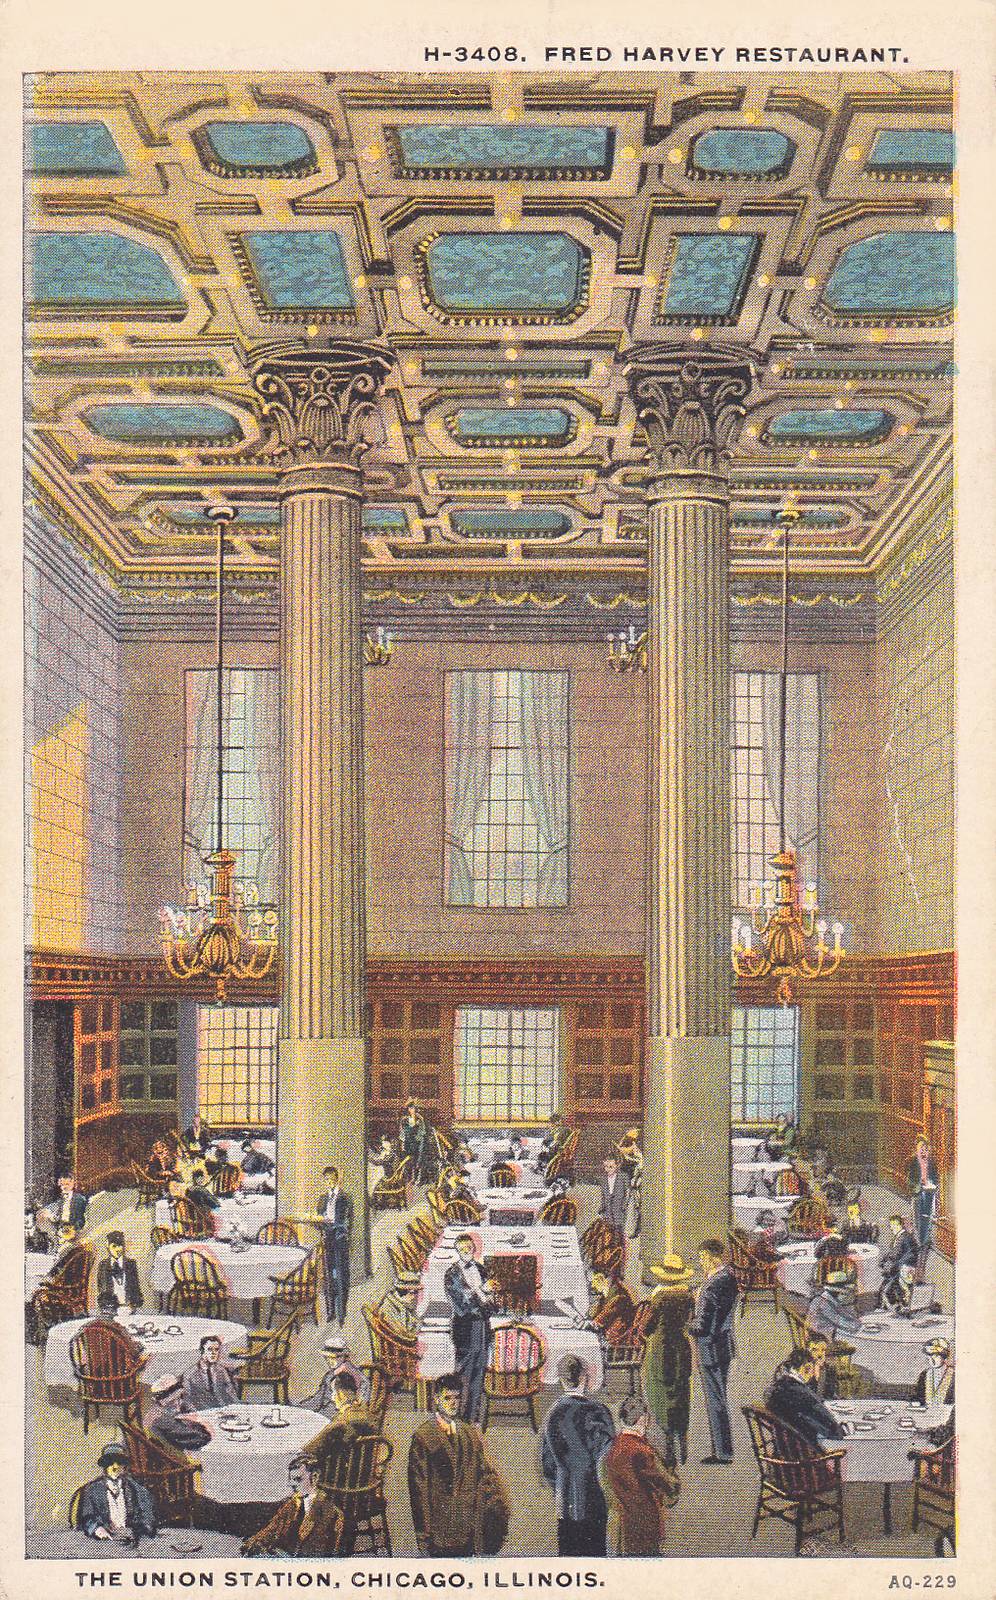 POSTCARD - CHICAGO - UNION STATION - WHEN NEW - FRED HARVEY RESTAURANT - 1920s